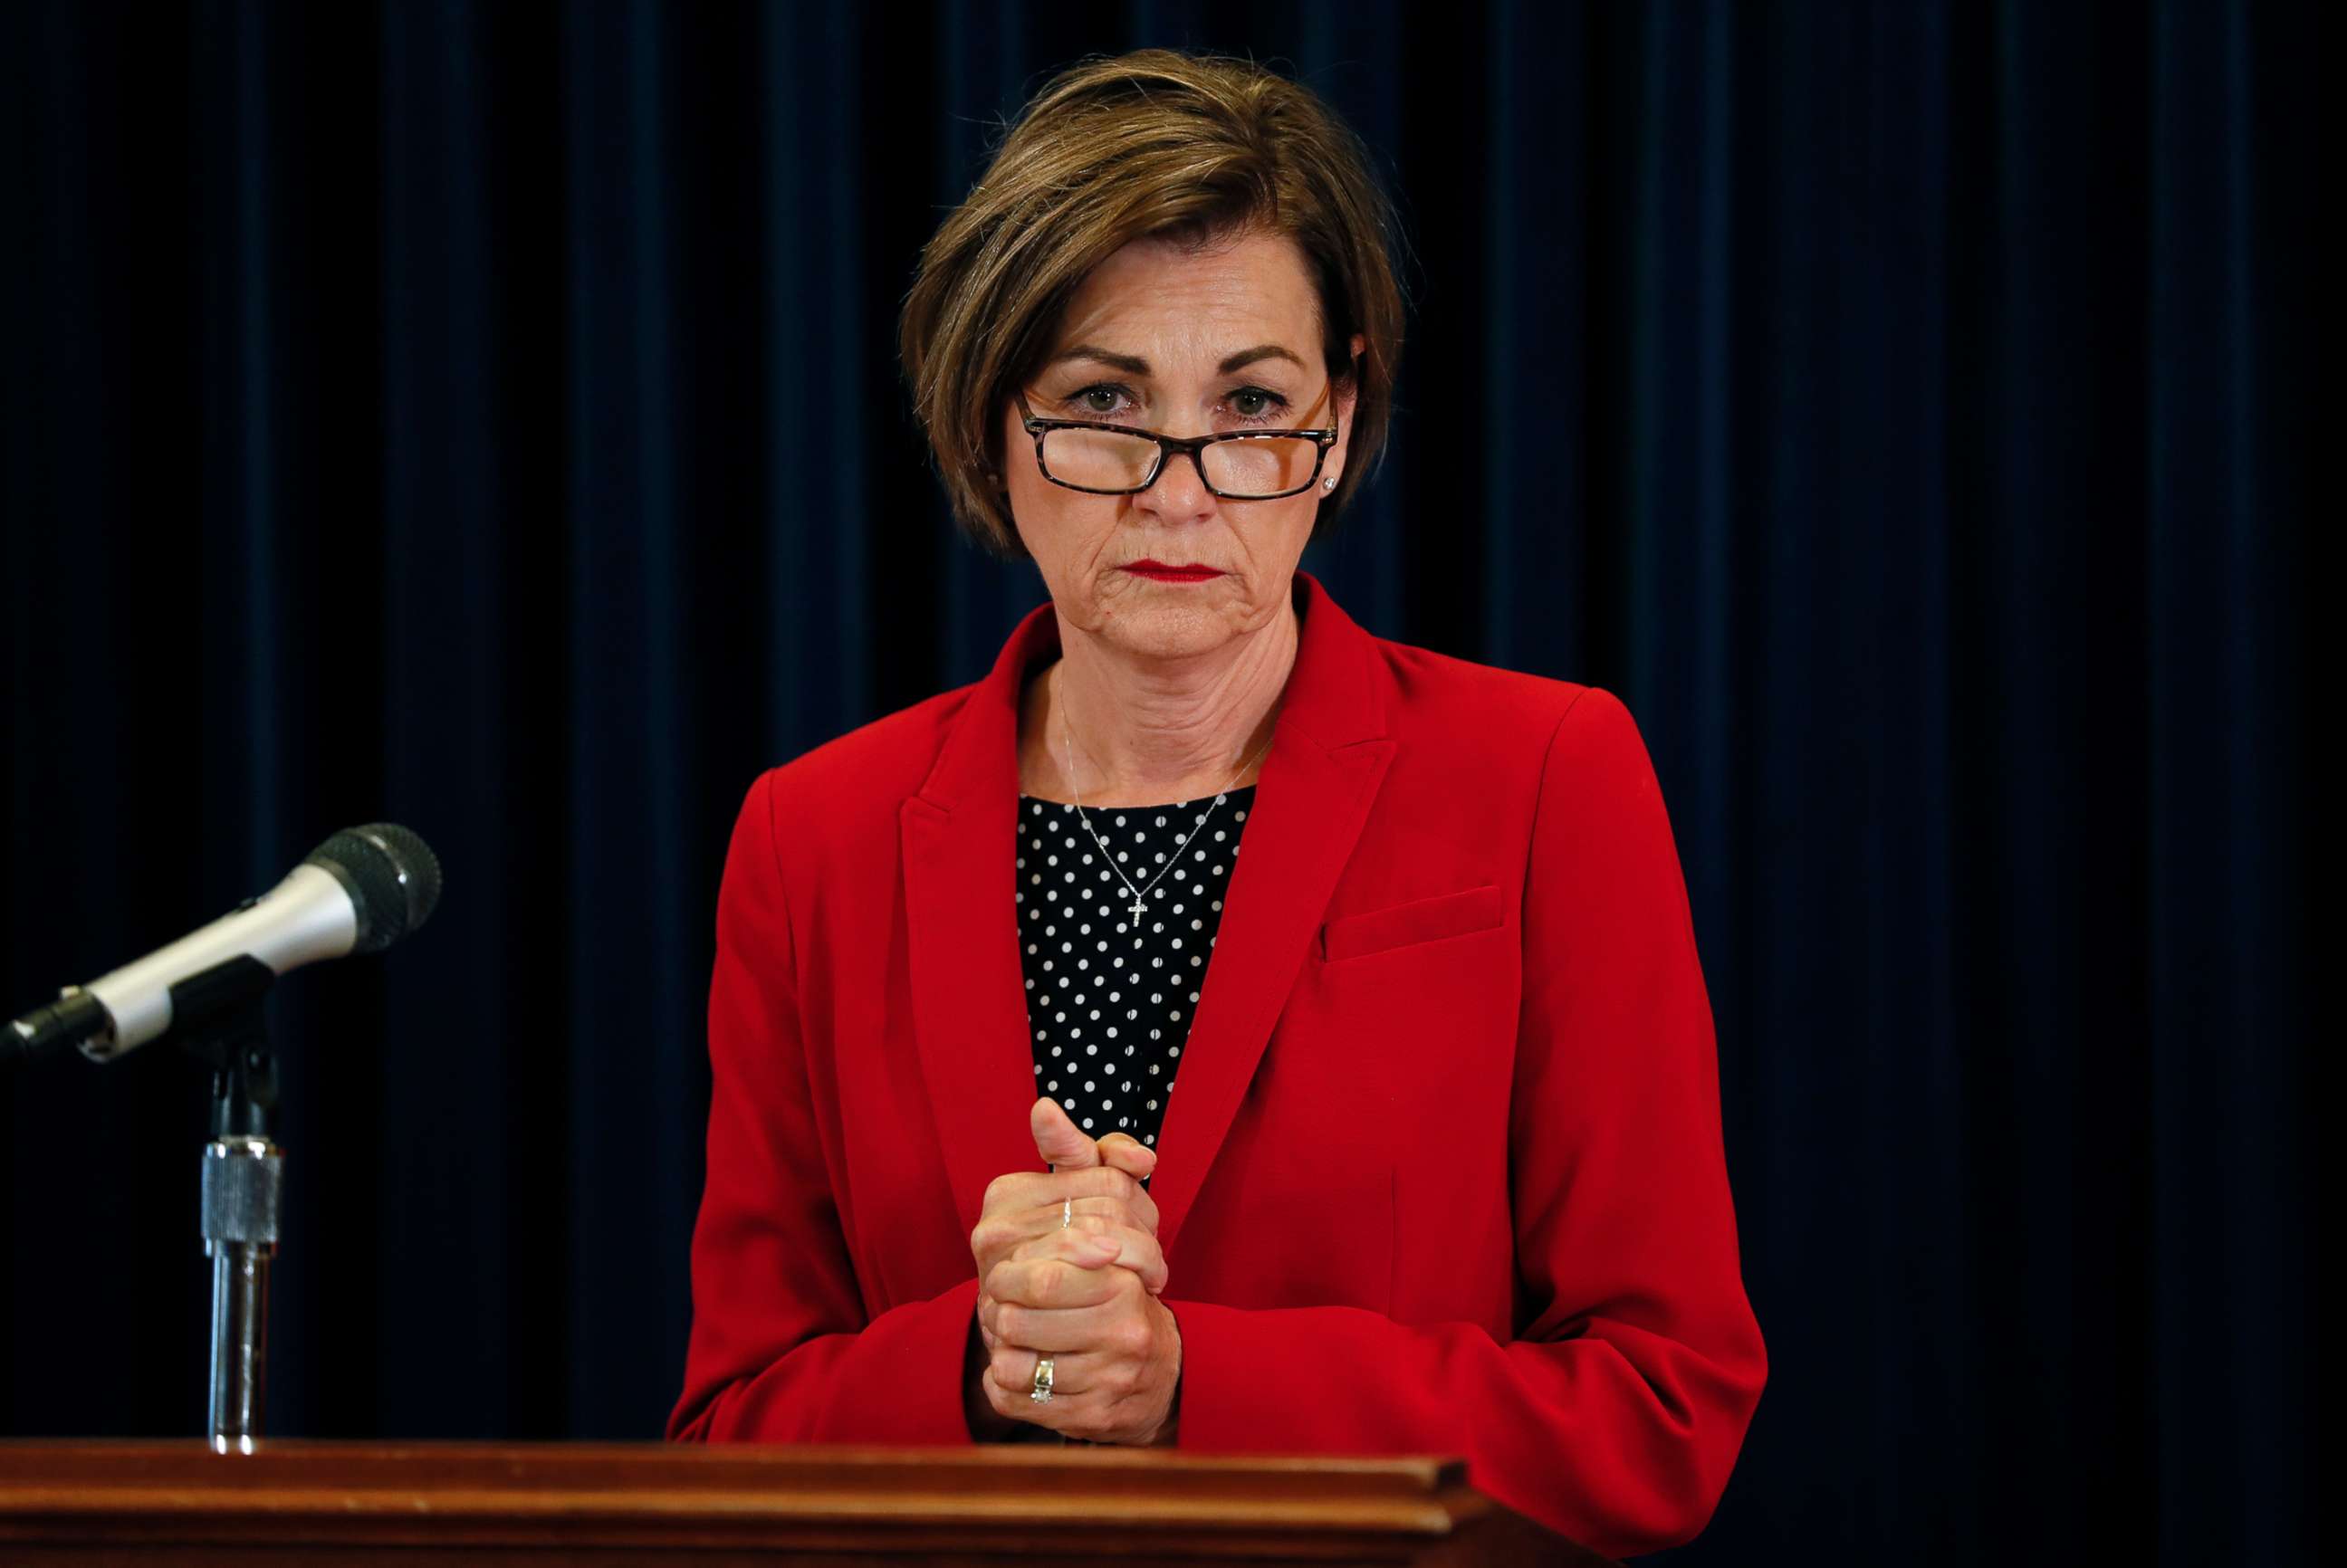 PHOTO: Iowa Gov. Kim Reynolds updates the state's response to the coronavirus outbreak during a news conference at the Statehouse, June 2, 2020, in Des Moines, Iowa.